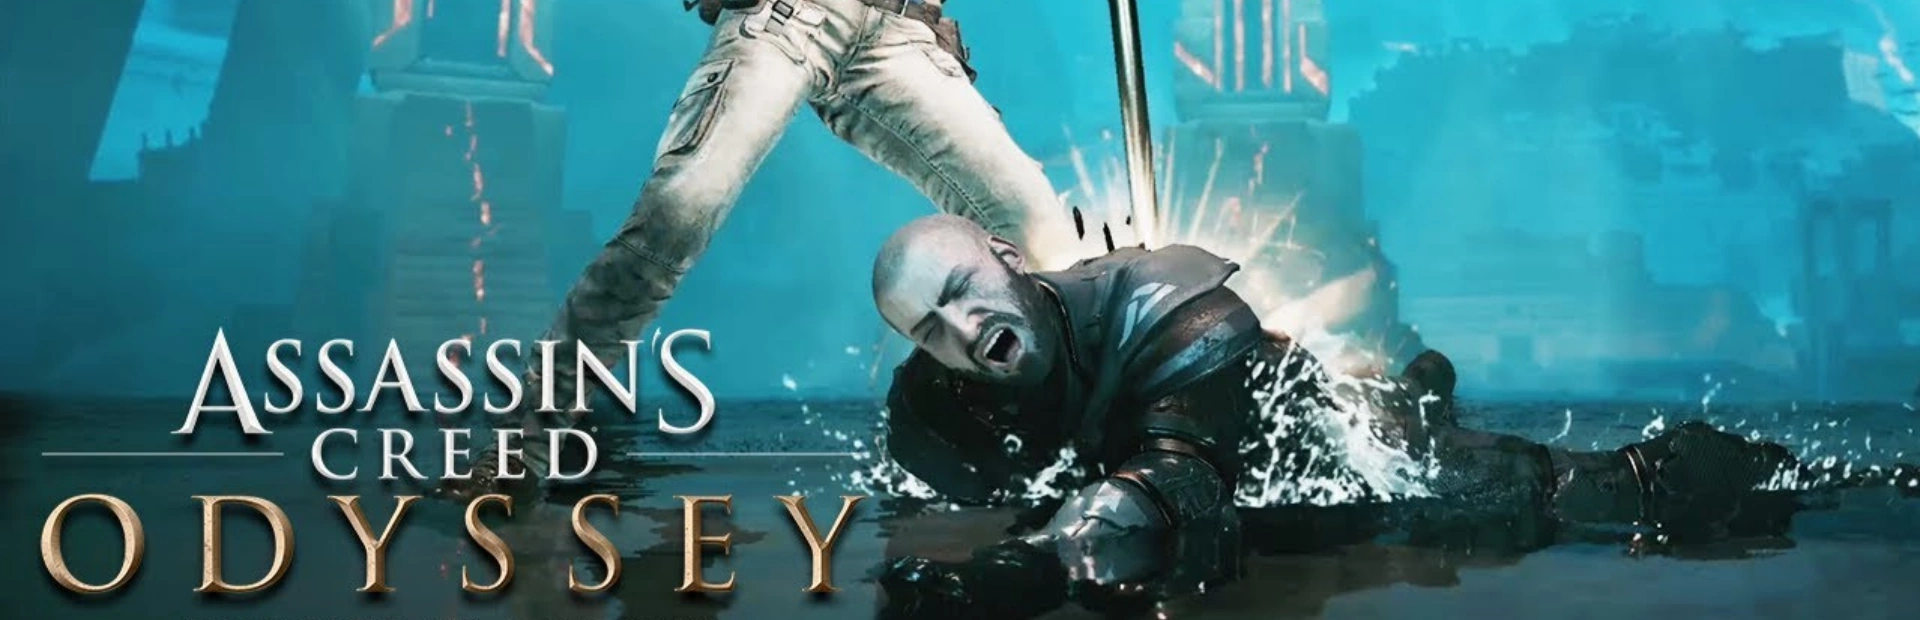 Assassins Creed Odyssey the fate of atlantis.banner1